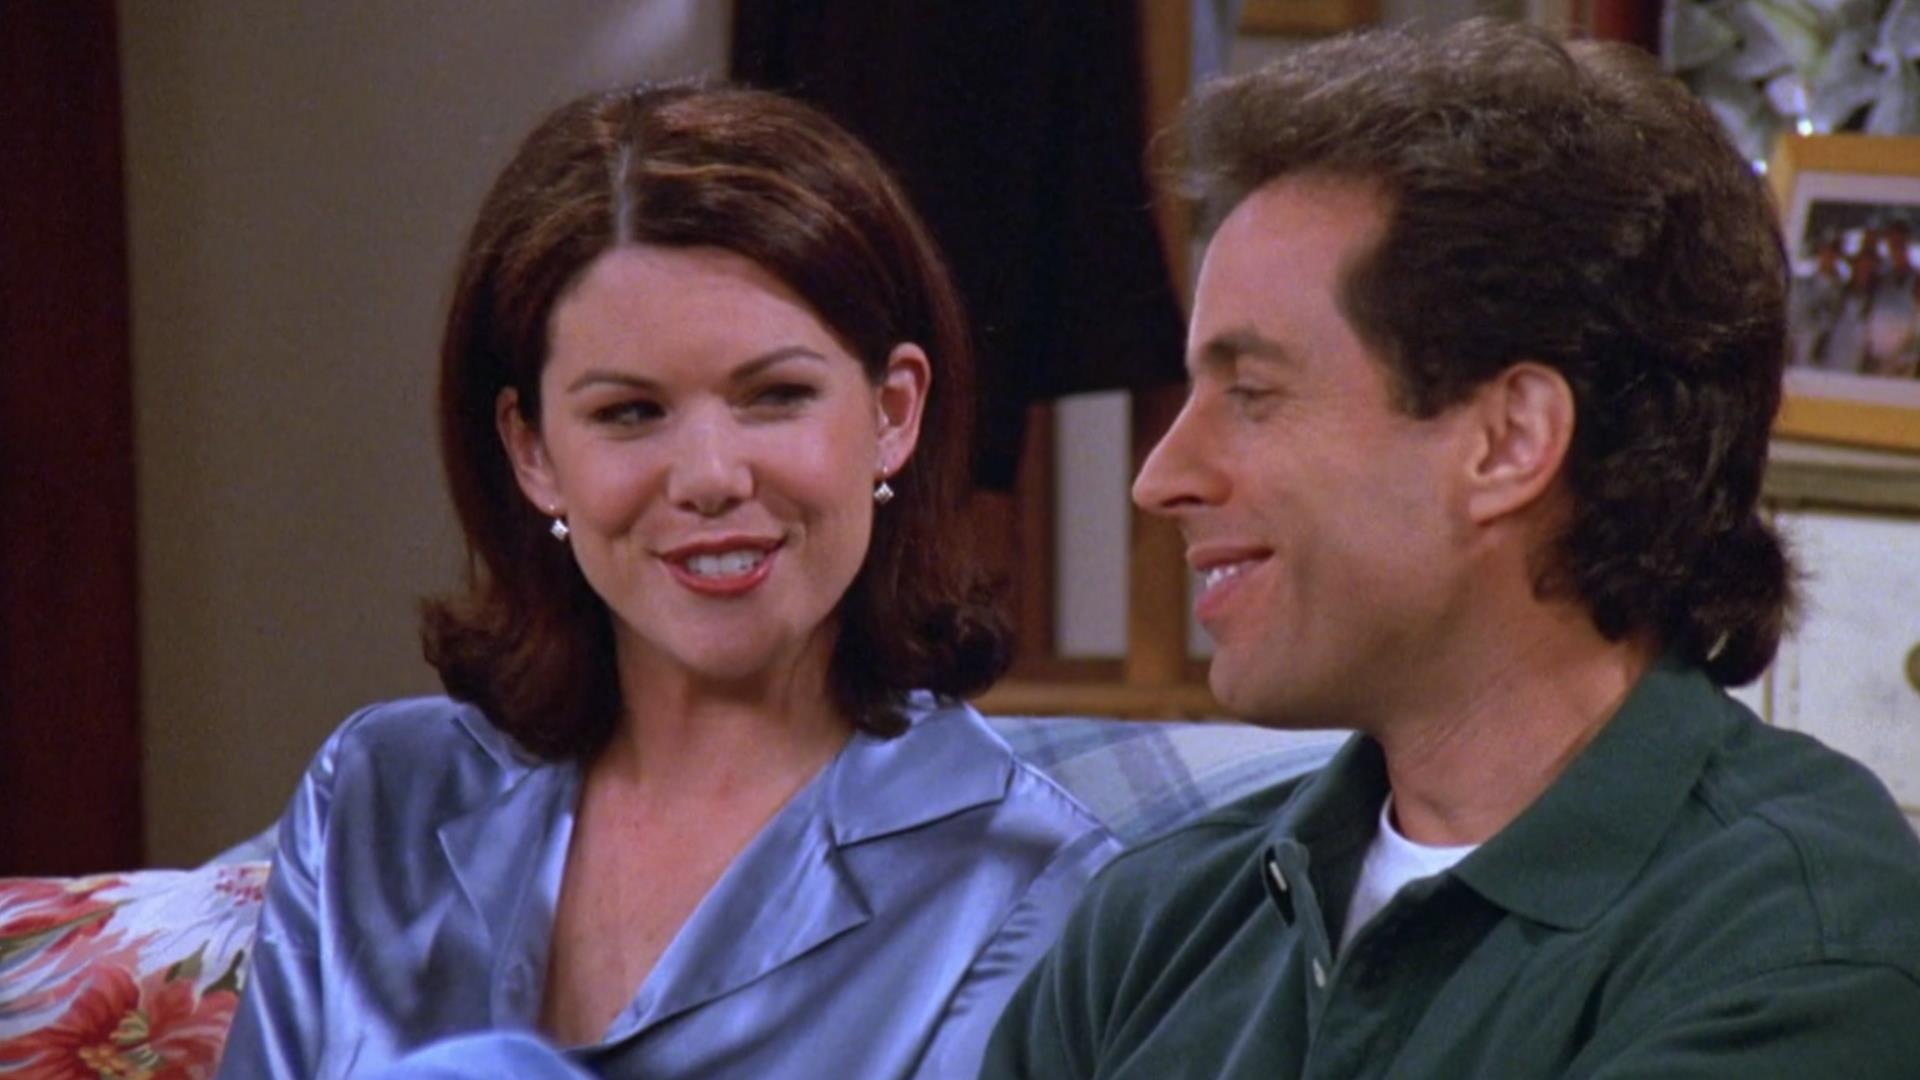 Remember when these actresses played Jerry’s girlfriends on 'Seinfeld&...